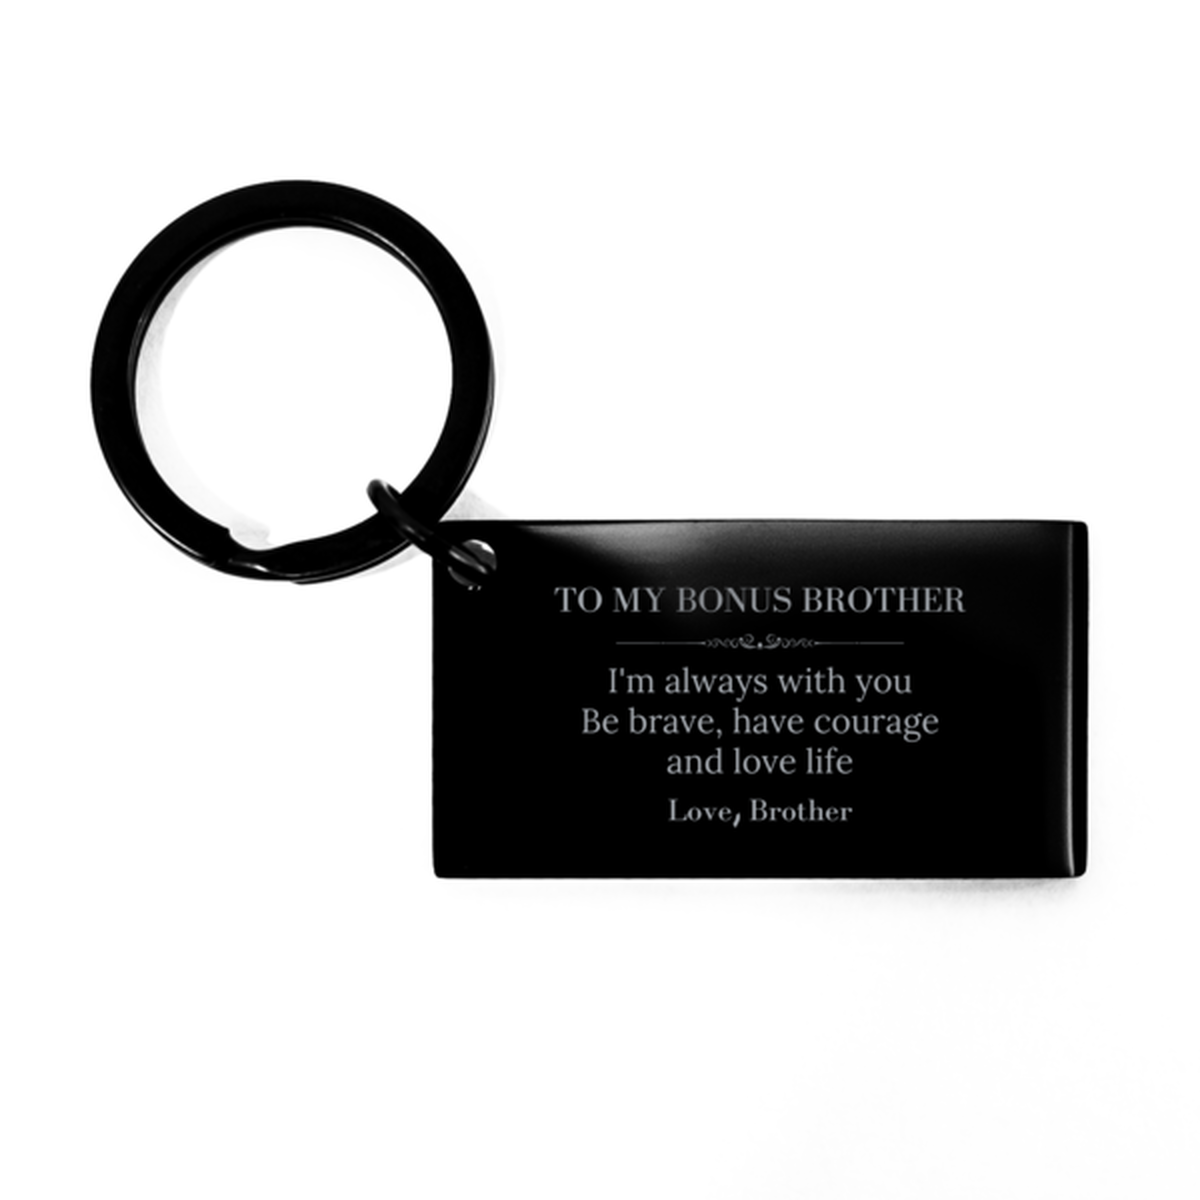 To My Bonus Brother Gifts from Brother, Unique Keychain Inspirational Christmas Birthday Graduation Gifts for Bonus Brother I'm always with you. Be brave, have courage and love life. Love, Brother